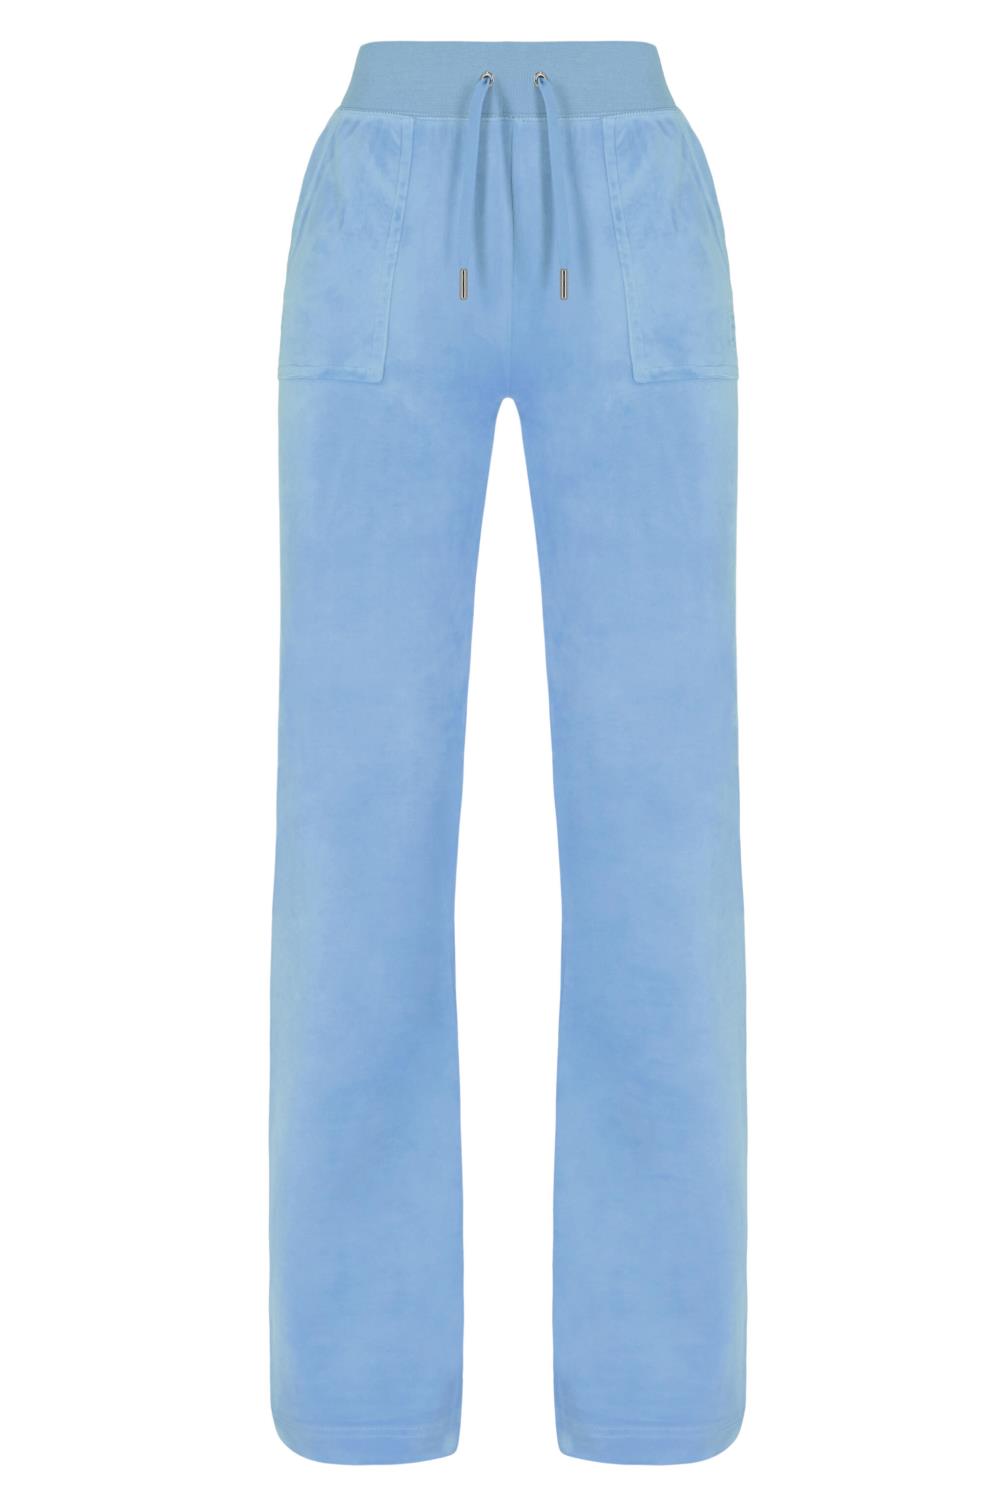 Del Ray Classic velour pant pocket design Powder Blue - Juicy Couture